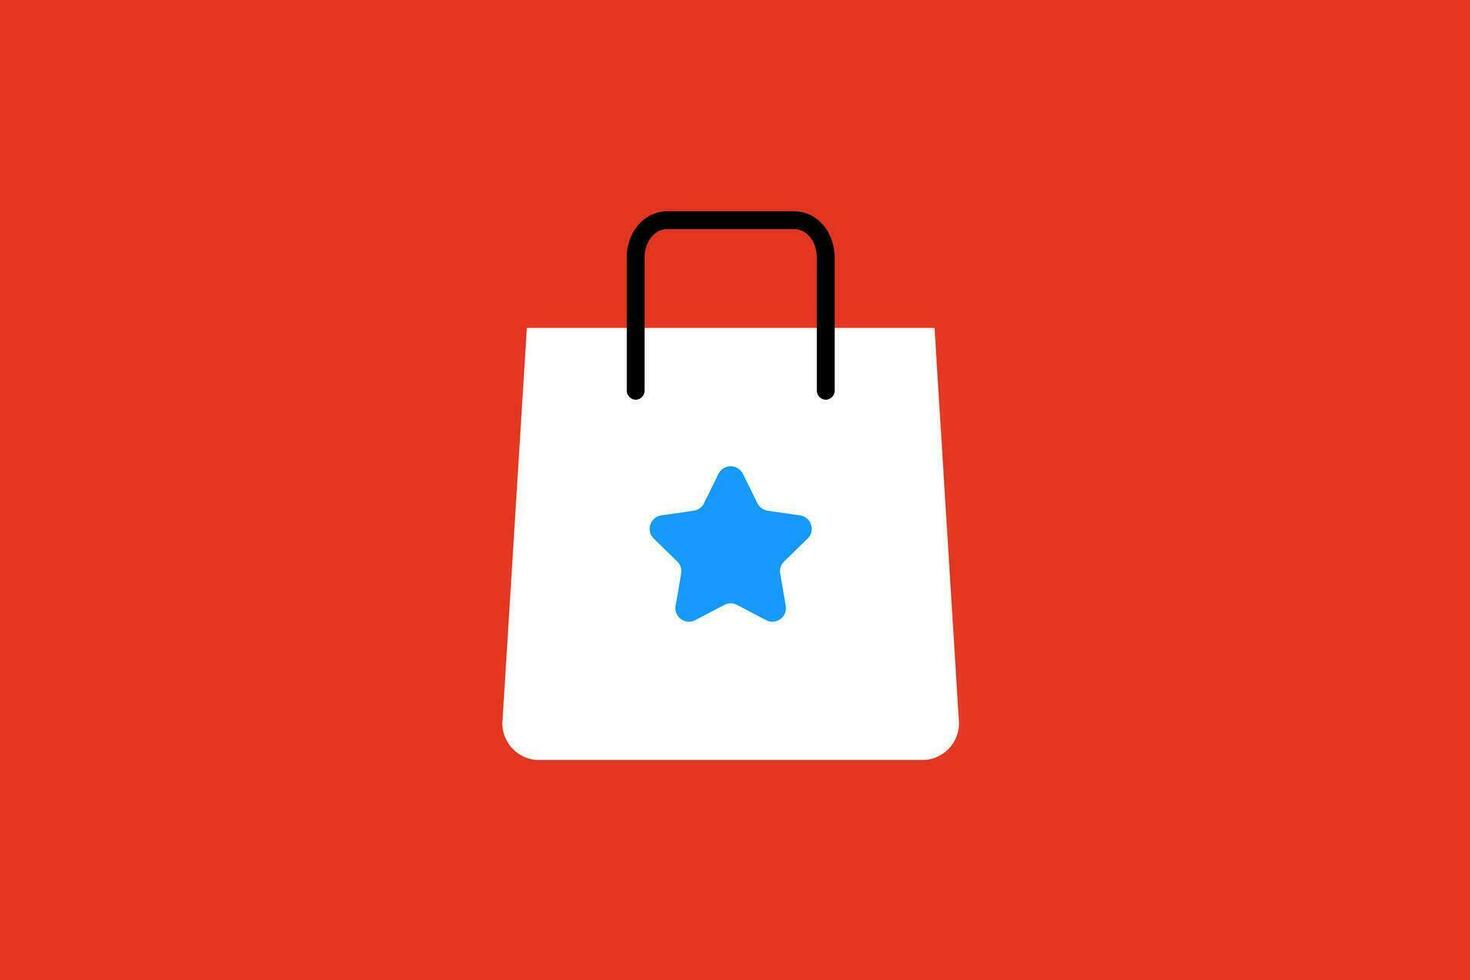 Shopping bag with star icon. Flat design. Vector illustration.